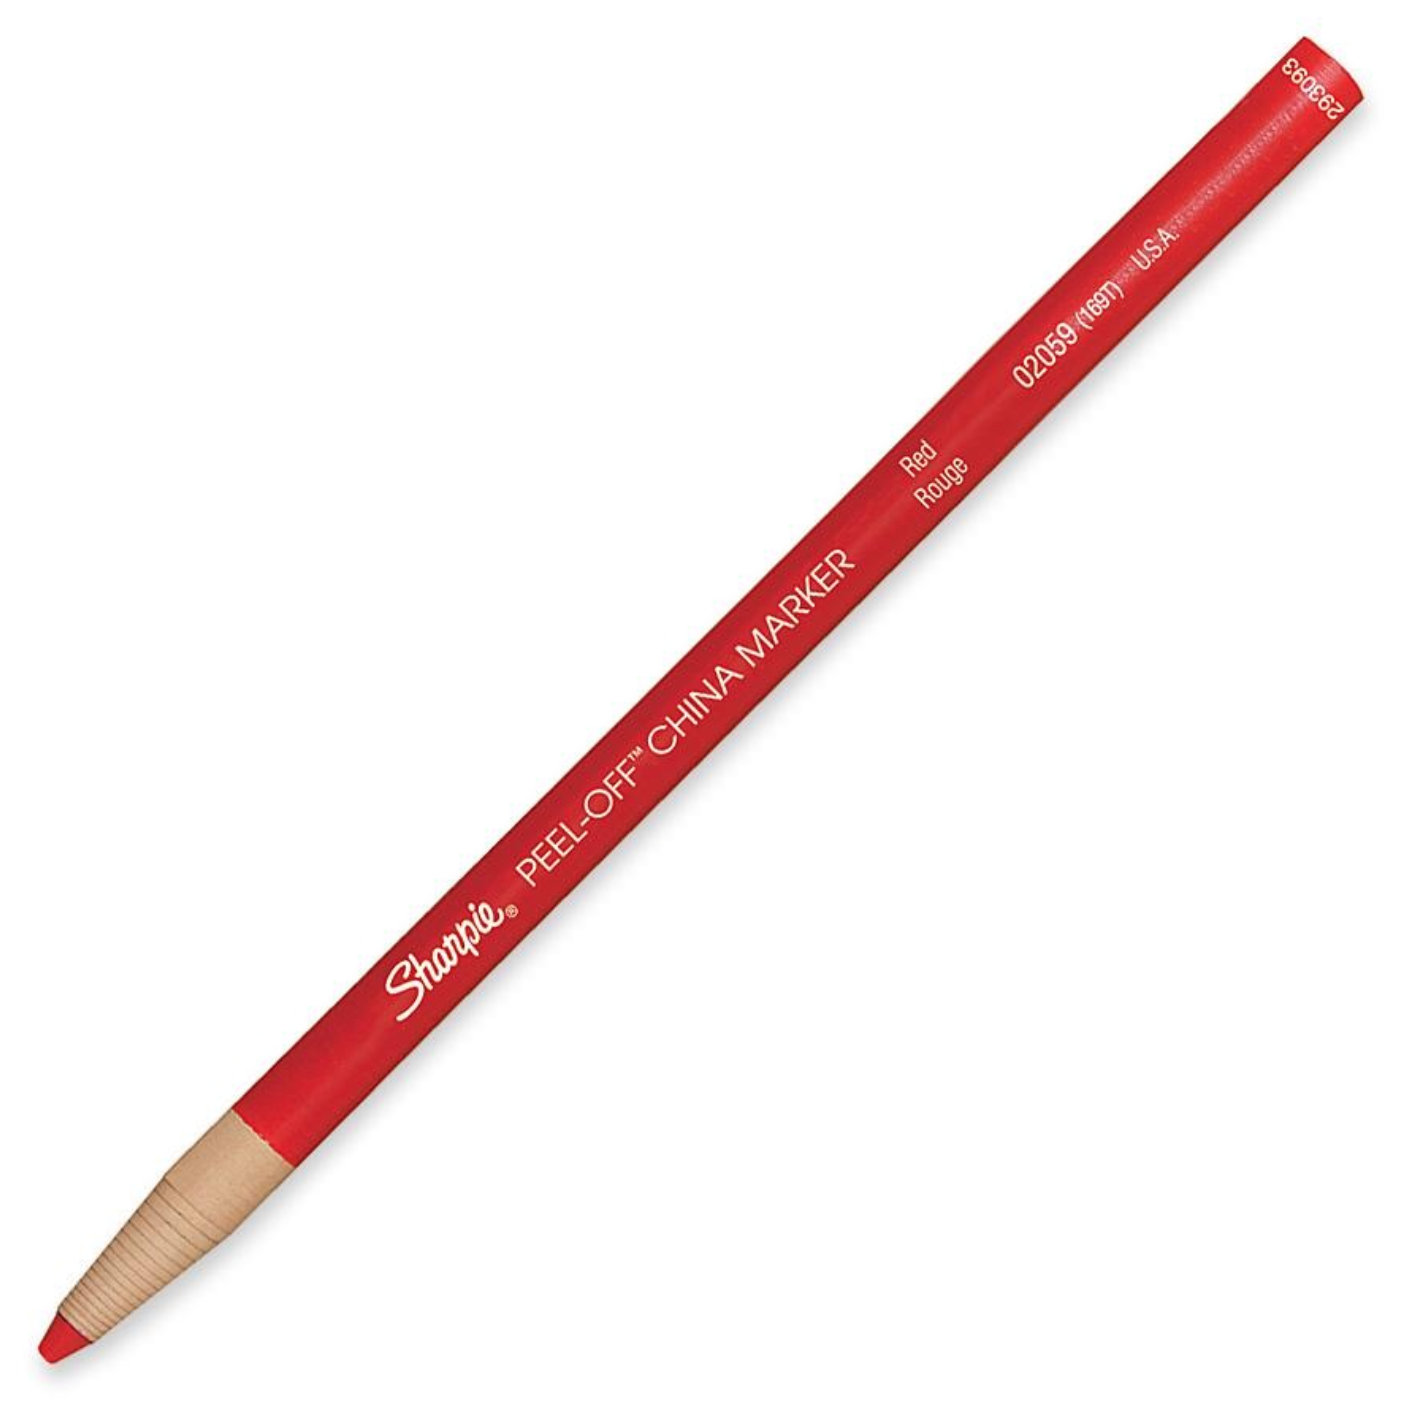 Sharpie Peel Off China Marker - Red